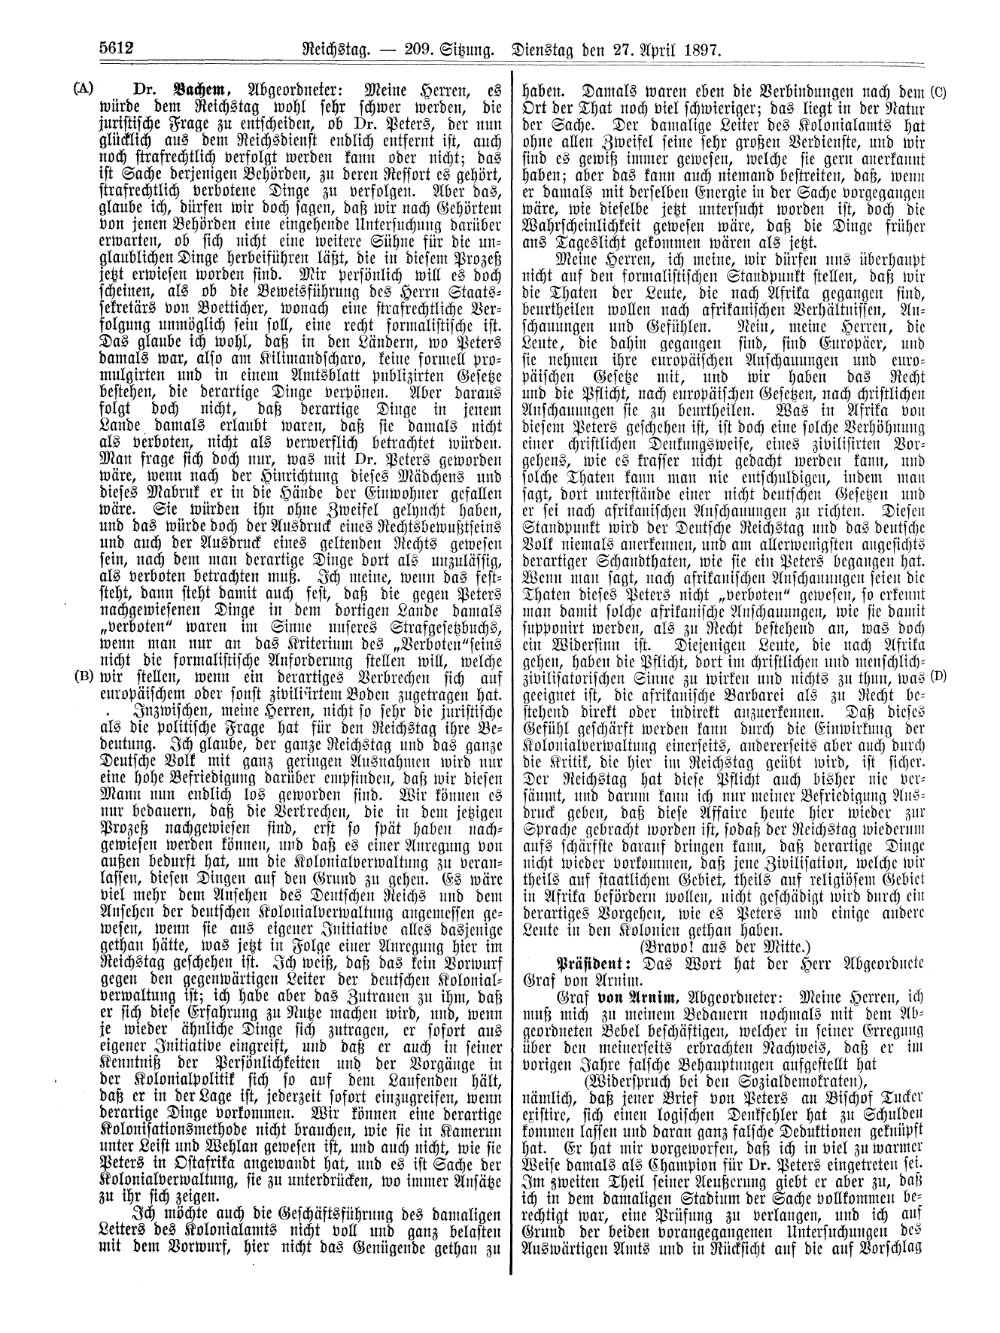 Scan of page 5612